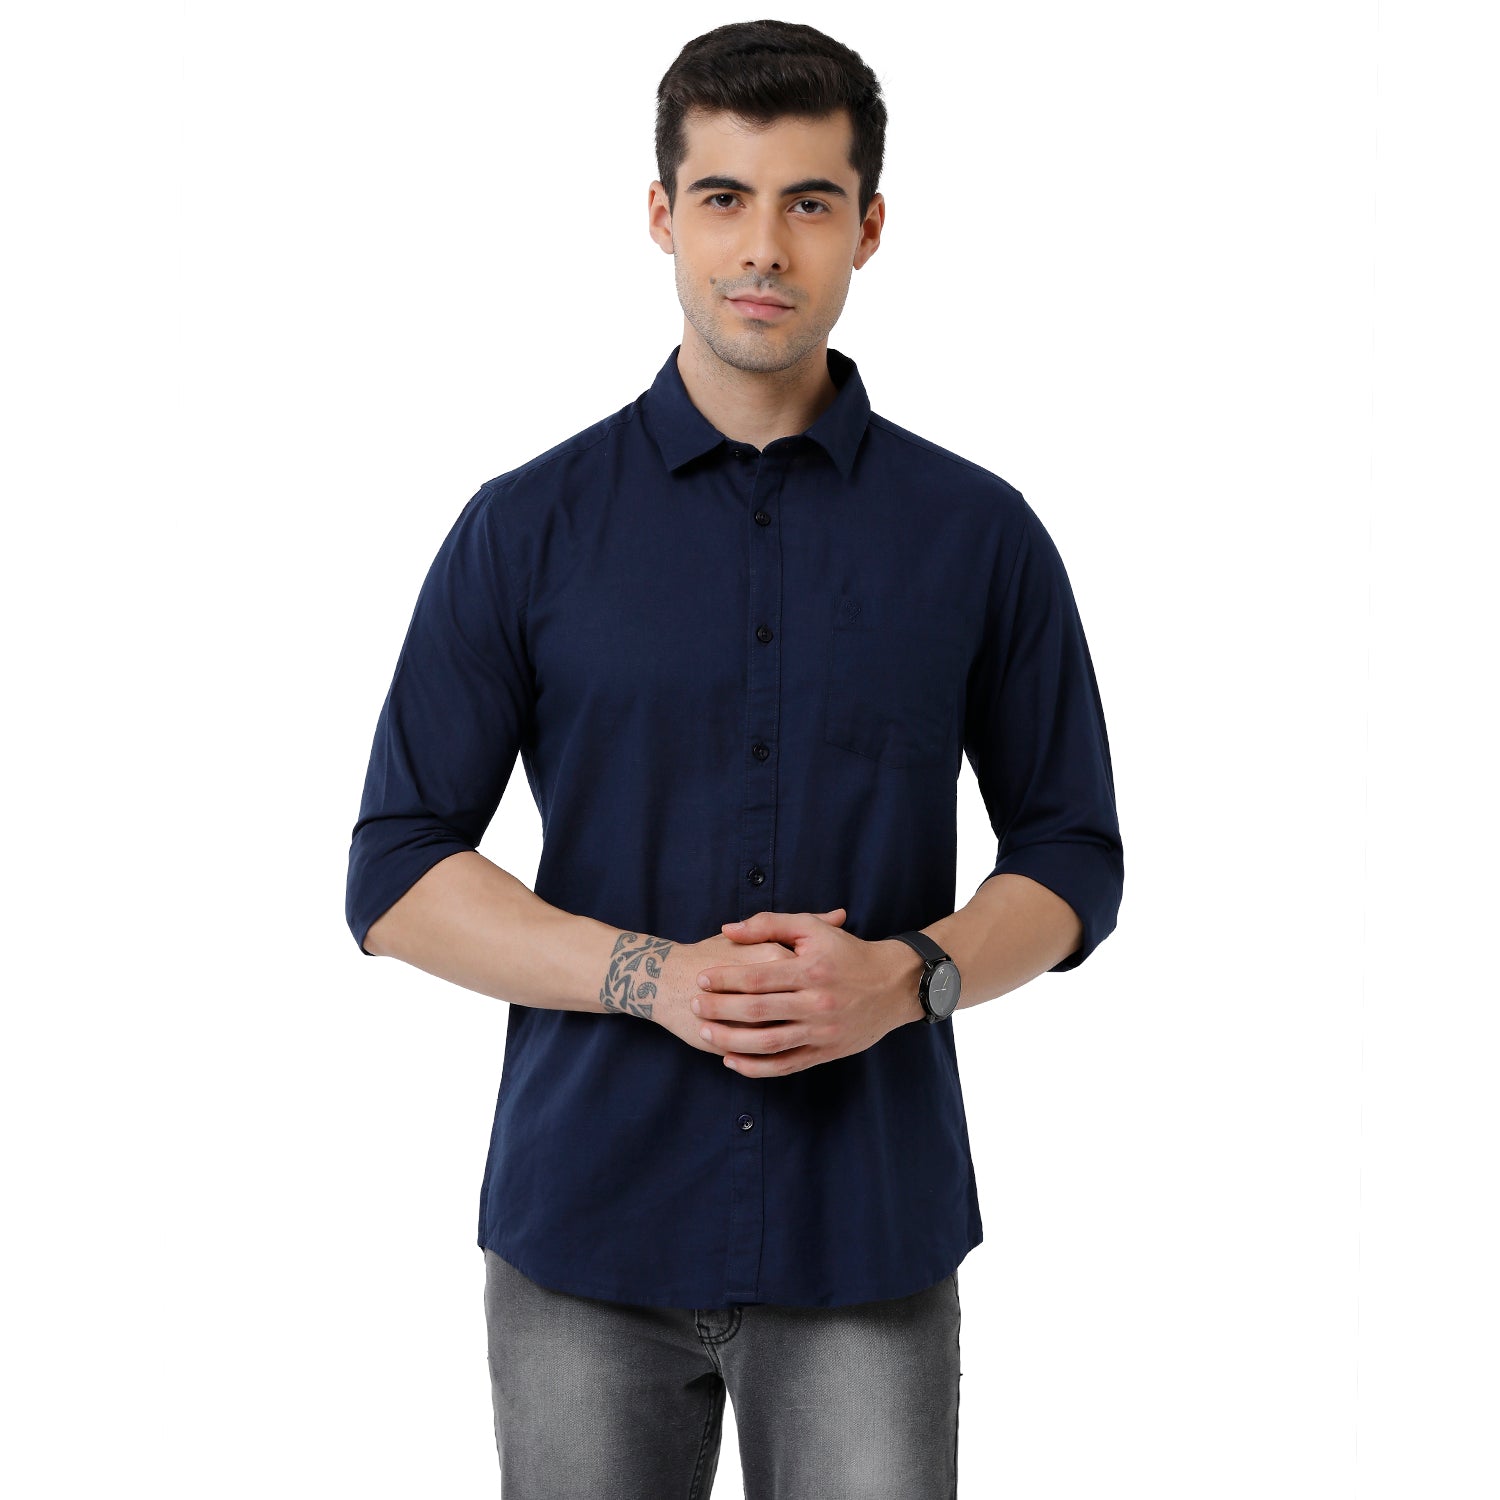 Classic Polo Mens Solid Slim Fit Full Sleeve Navy Blue Color Shirt - SN1-111 E Shirts Classic Polo 